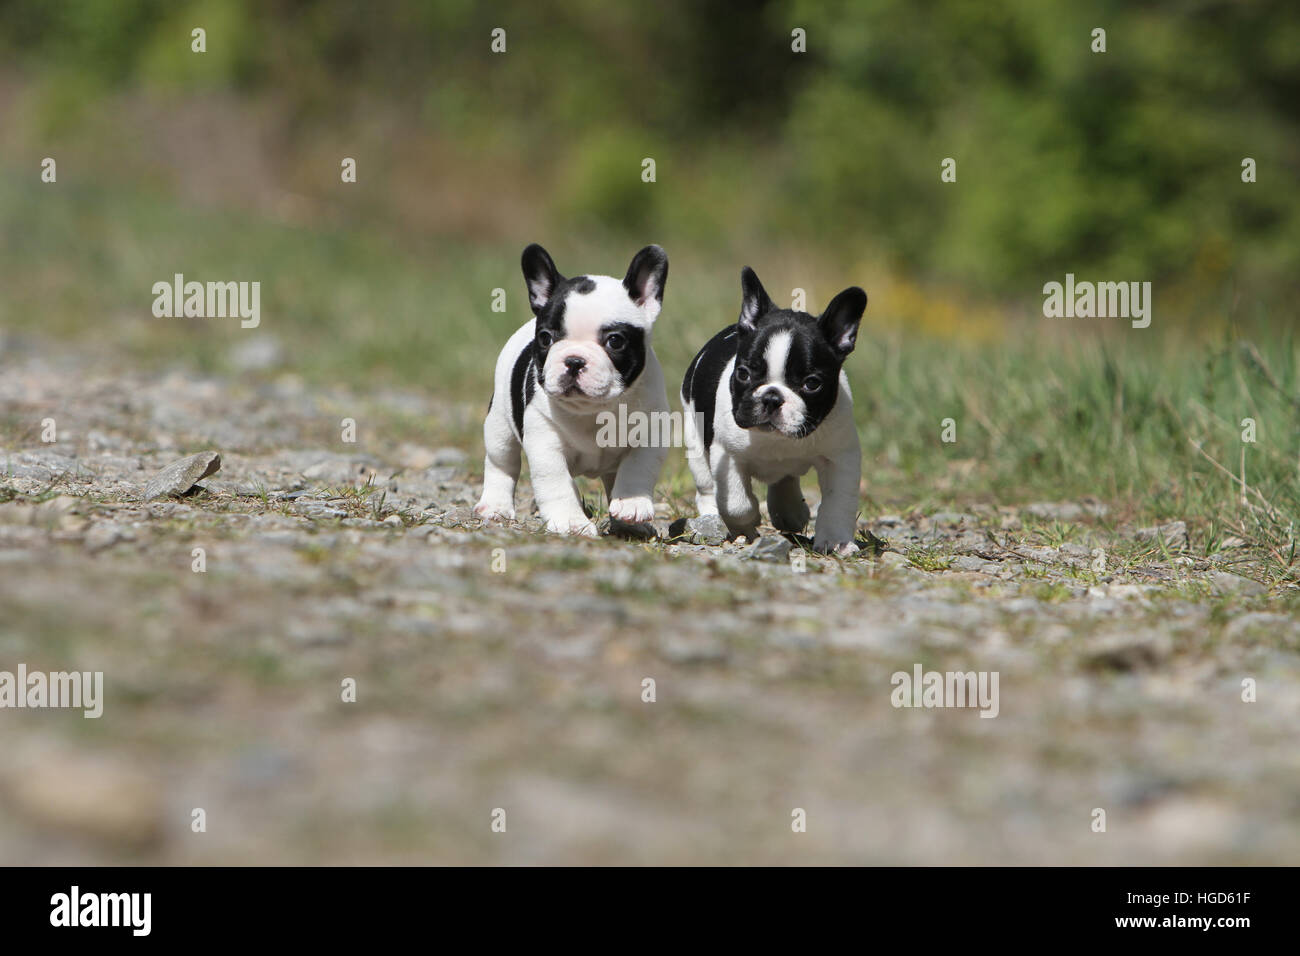 Dog French Bulldog / Bouledogue Français two puppy black and white running Stock Photo